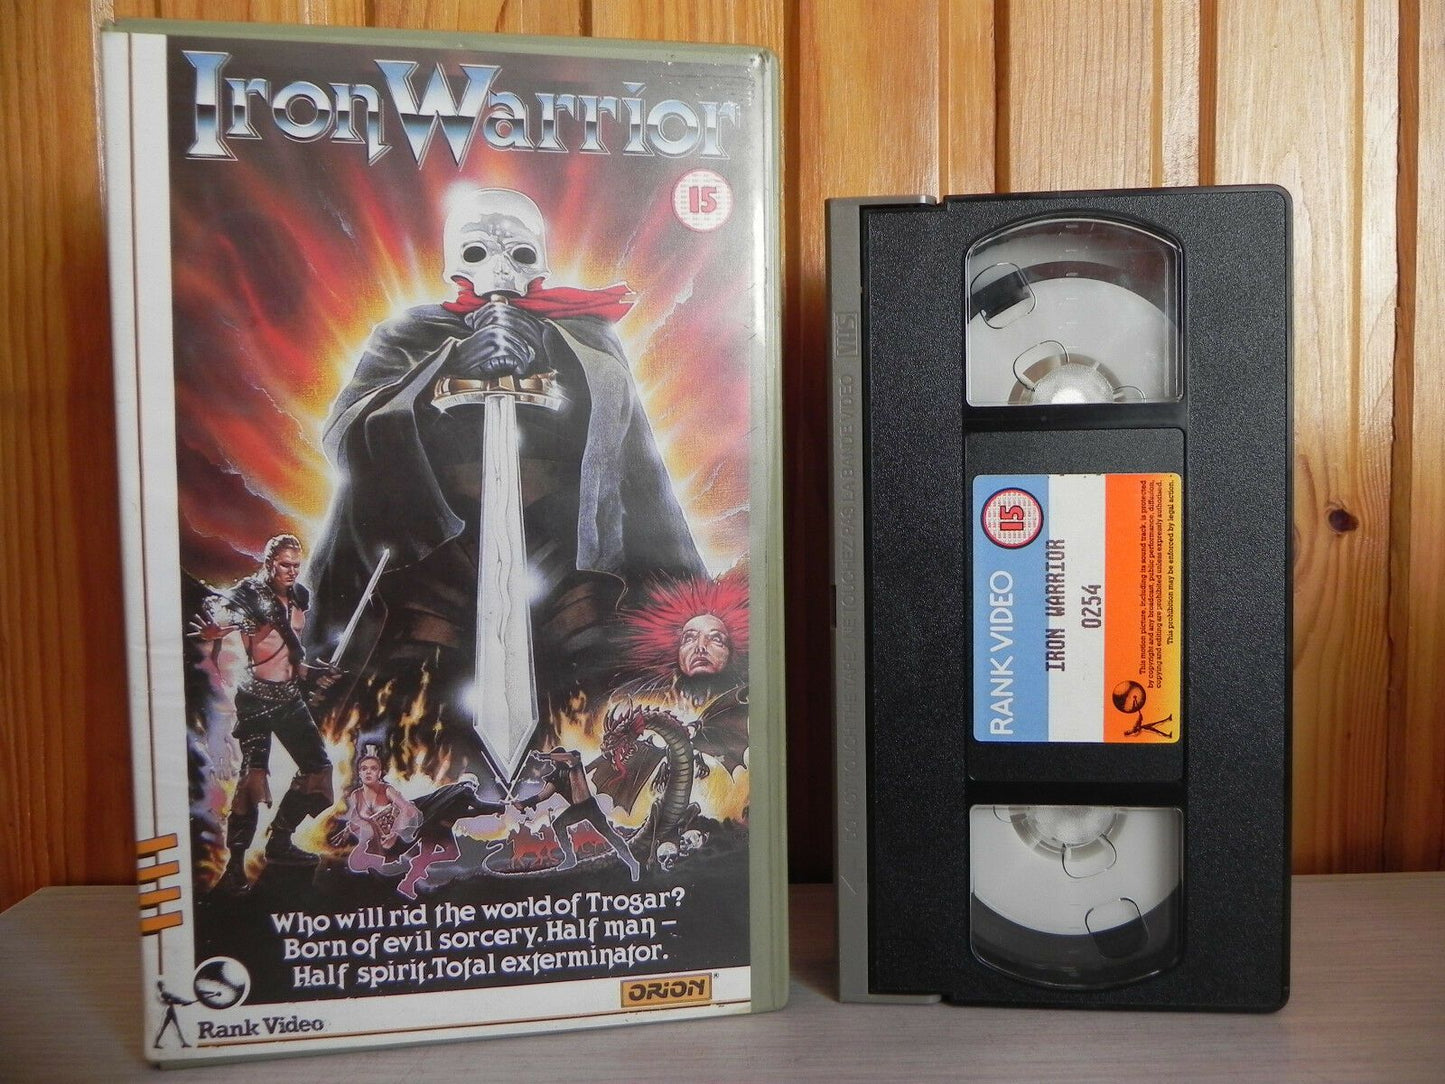 Ator - Iron Warrior - Miles O'Keeffe - Orion - Ex Rental - Pre Cert - OOP Pal VHS-